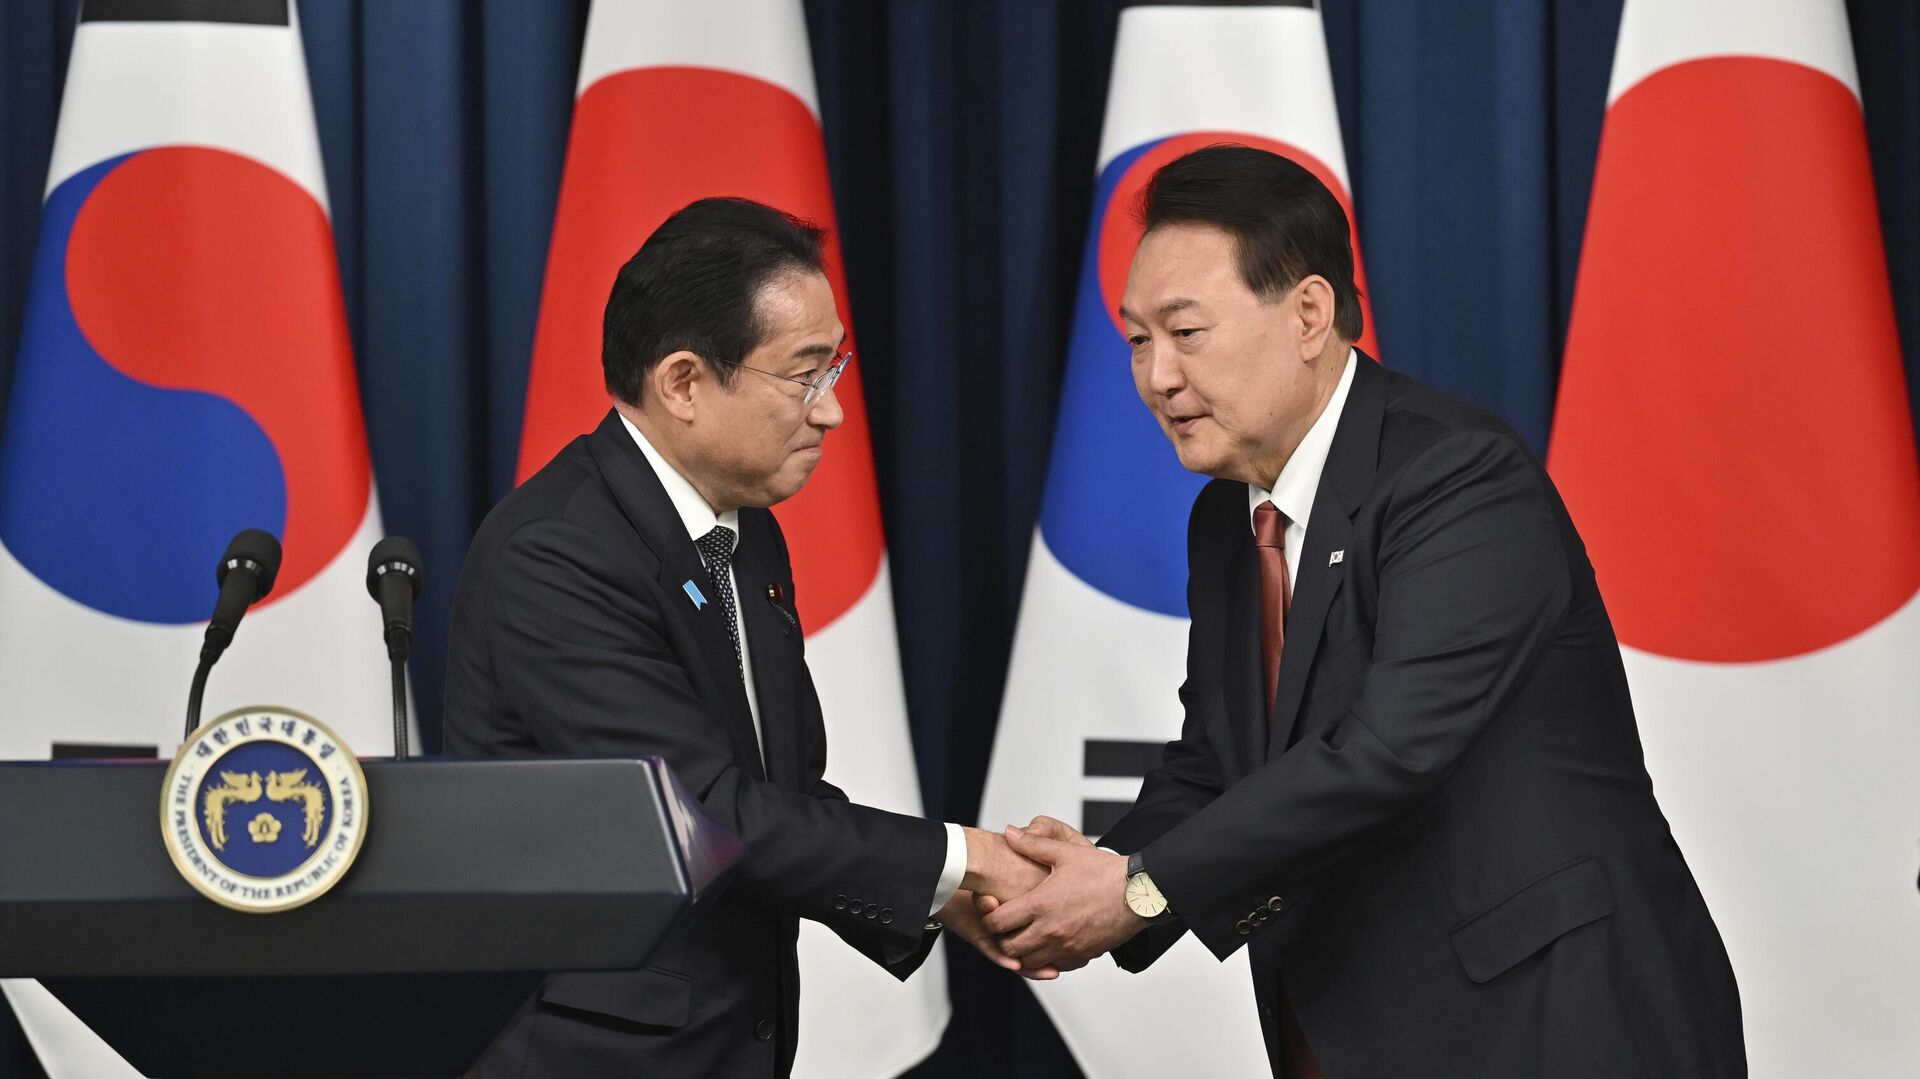 South Korean President Yoon Suk Yeol, right, shakes hands with Japanese Prime Minister Fumio Kishida during a joint press conference after their meeting at the presidential office in Seoul - Sputnik International, 1920, 18.08.2023